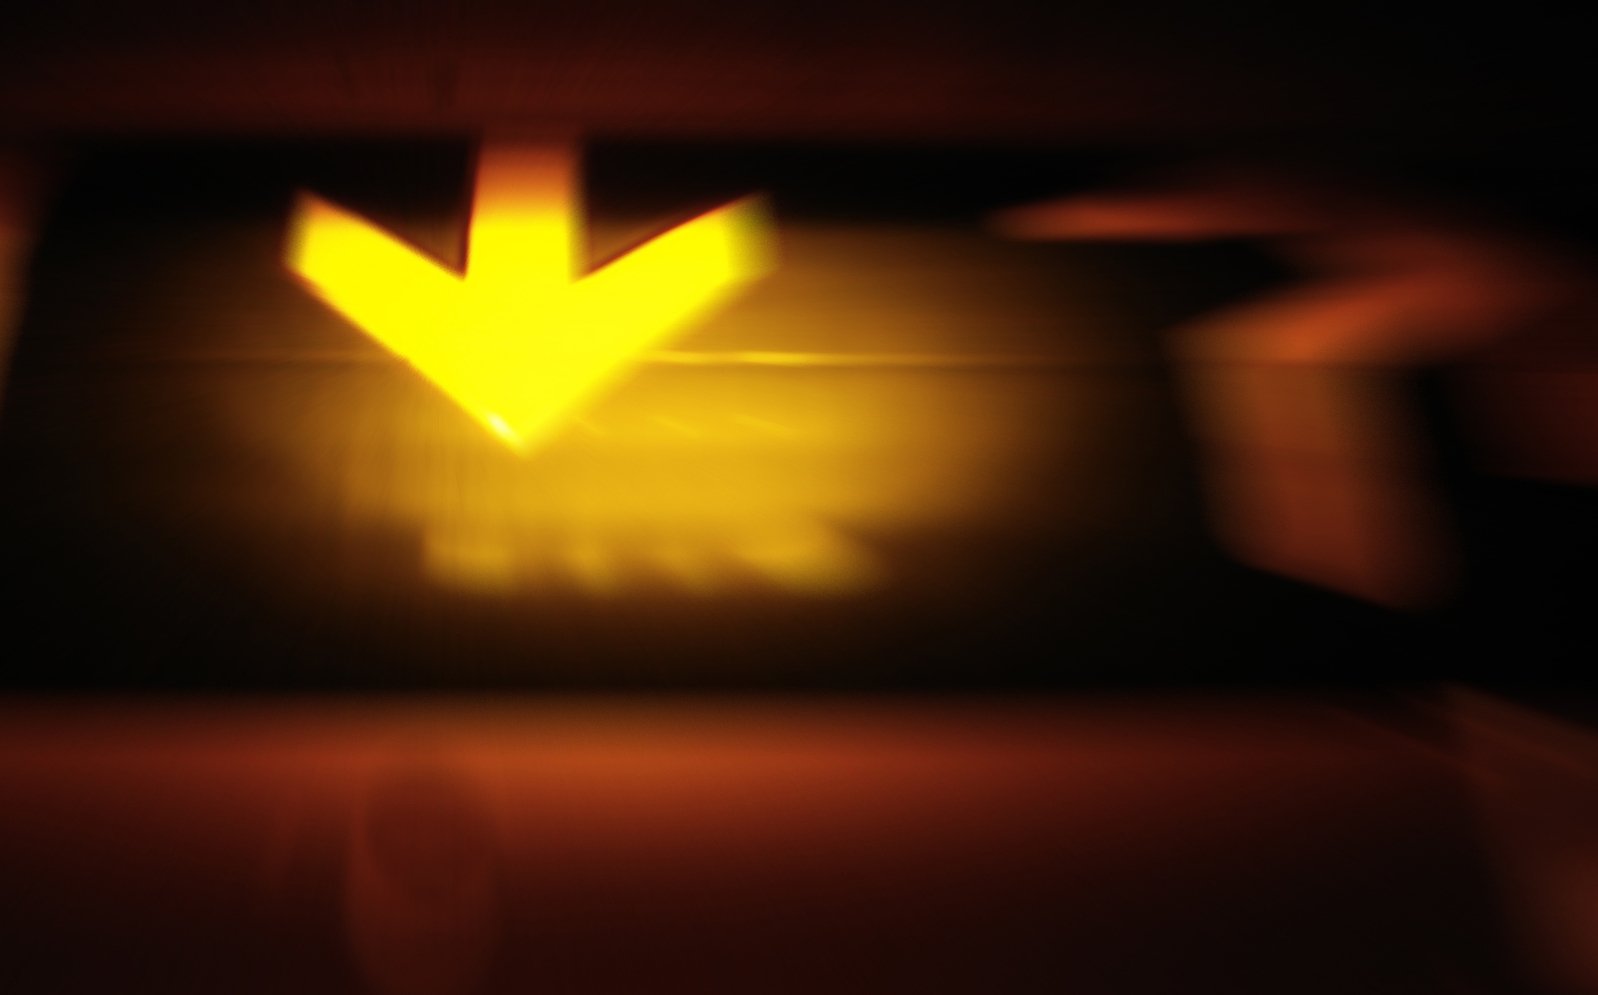 the blurry image shows a yellow arrow